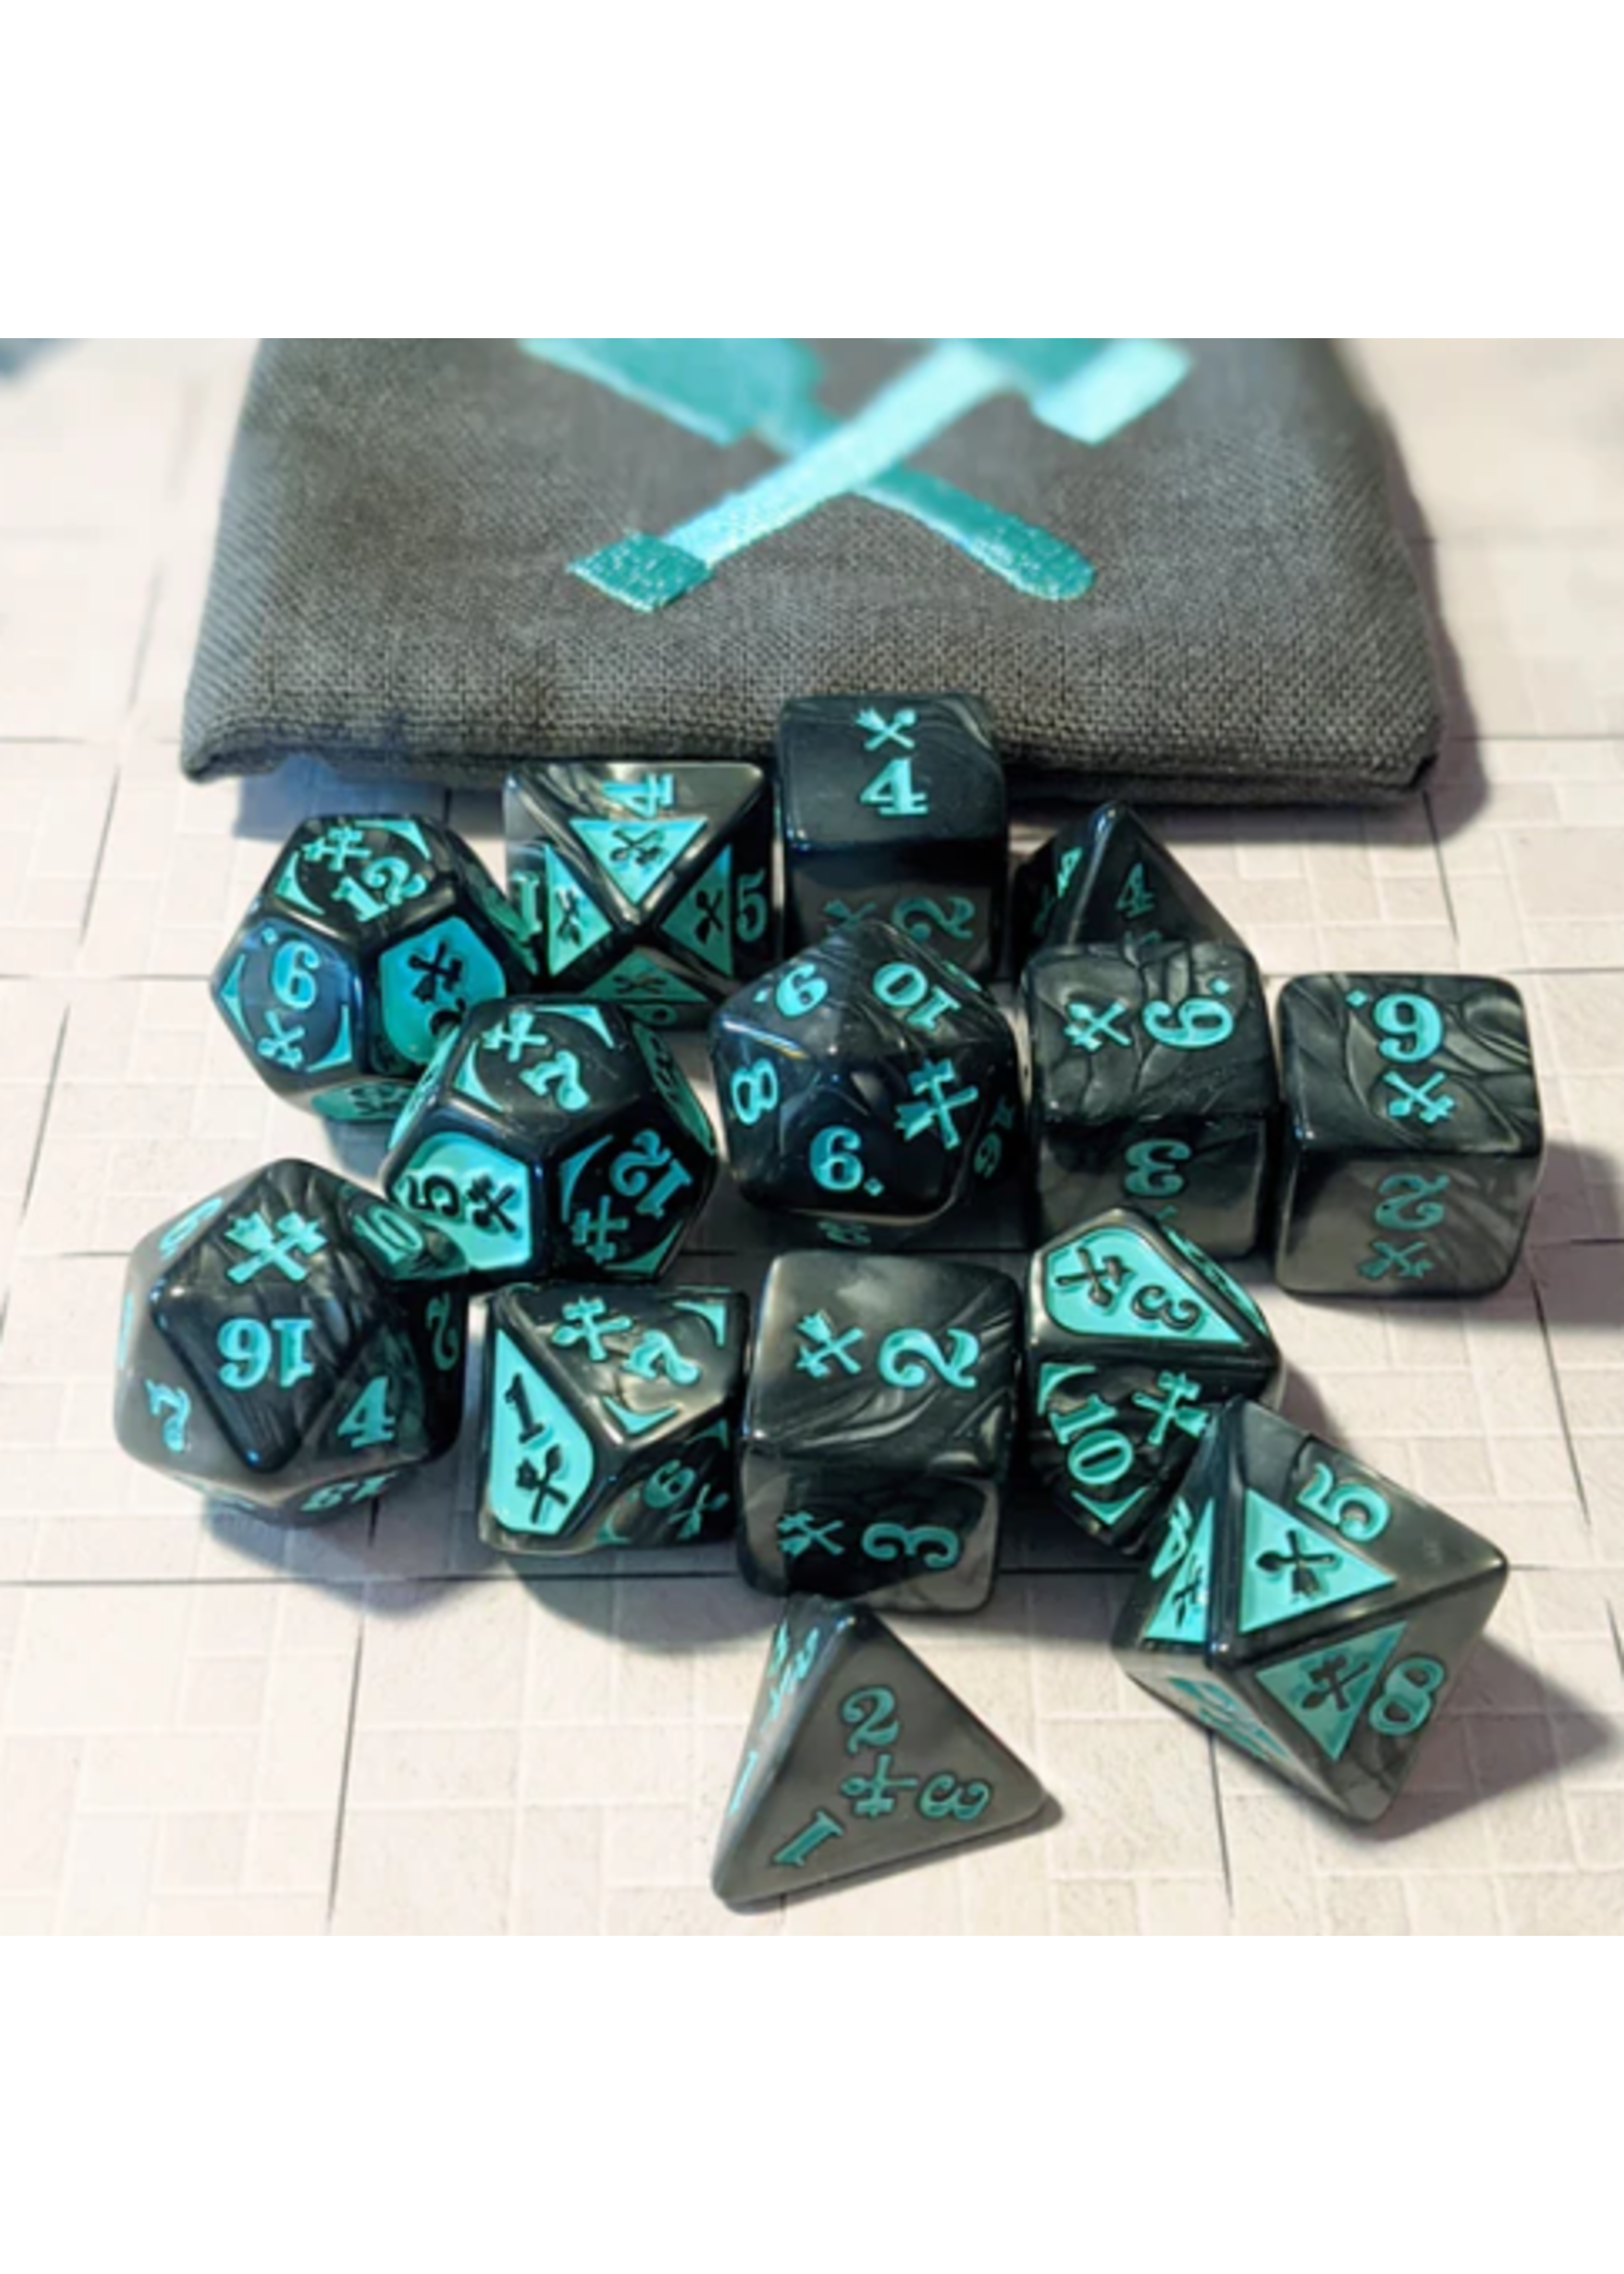 Gyld Bludgeoning Damage Dice - Marble Black with Teal (14)